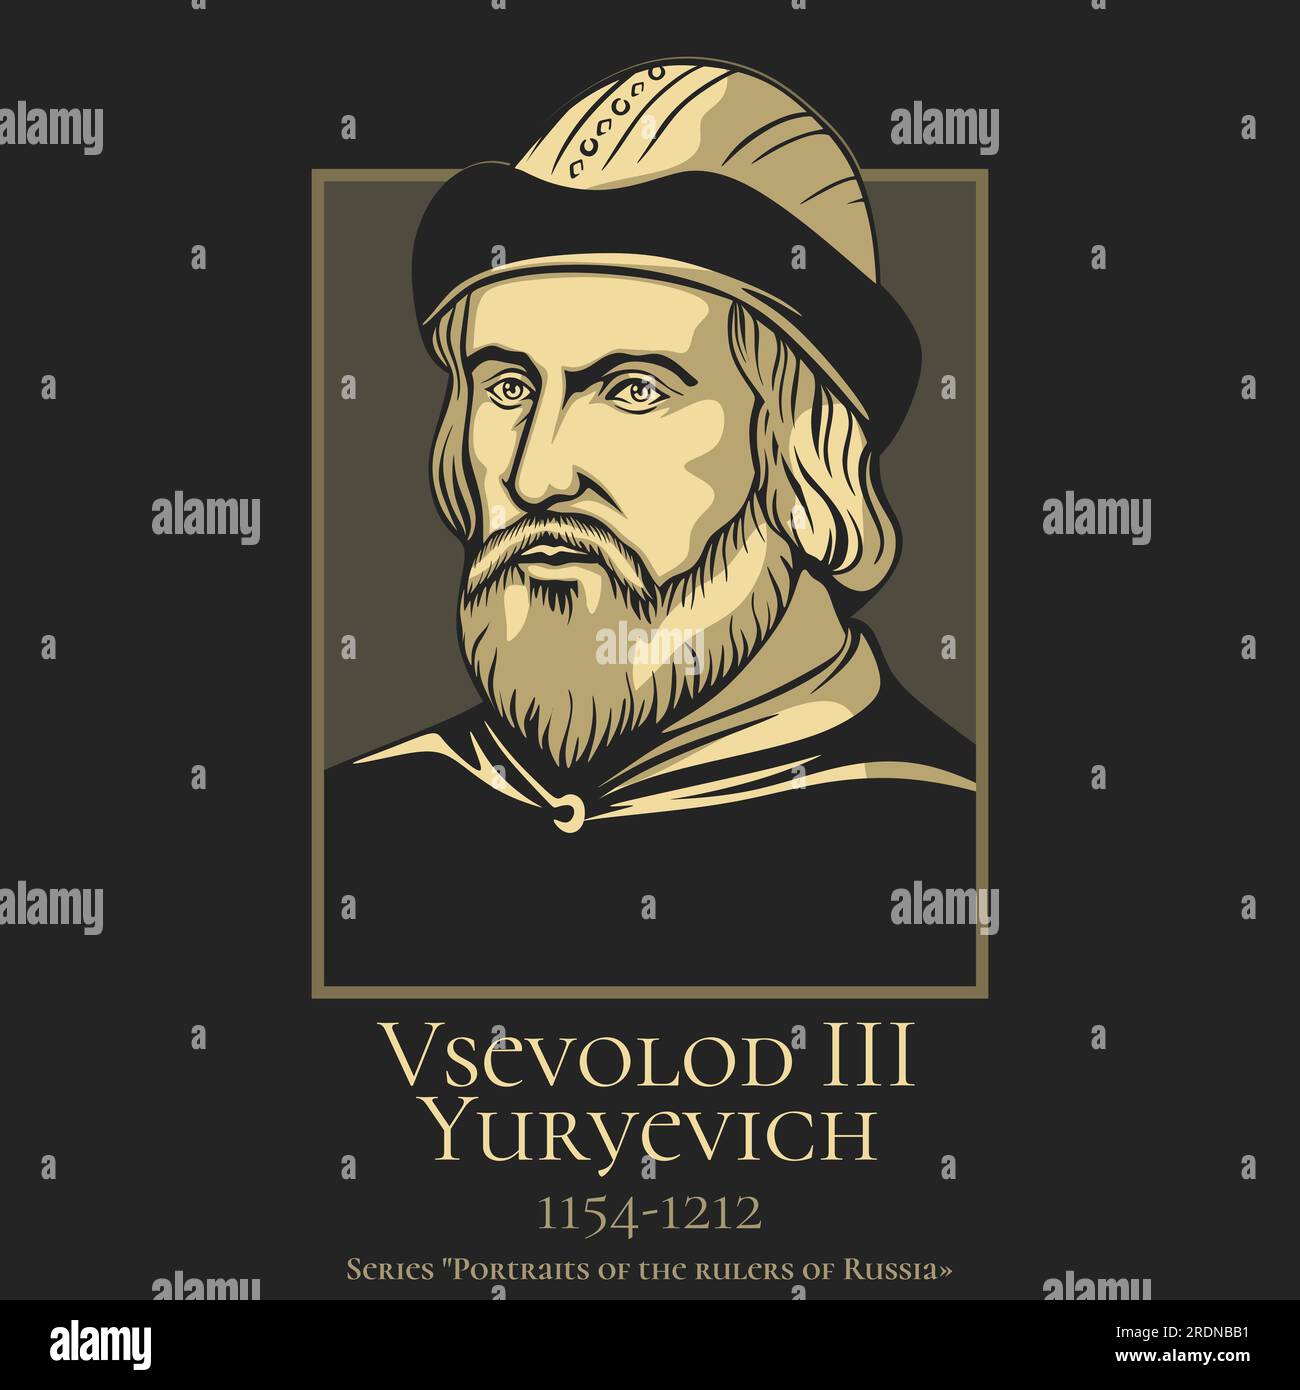 Portrait of the rulers of Russia. Vsevolod III Yuryevich (1154-1212) was Grand Prince of Vladimir from 1176 to 1212. During his long reign, the city r Stock Vector